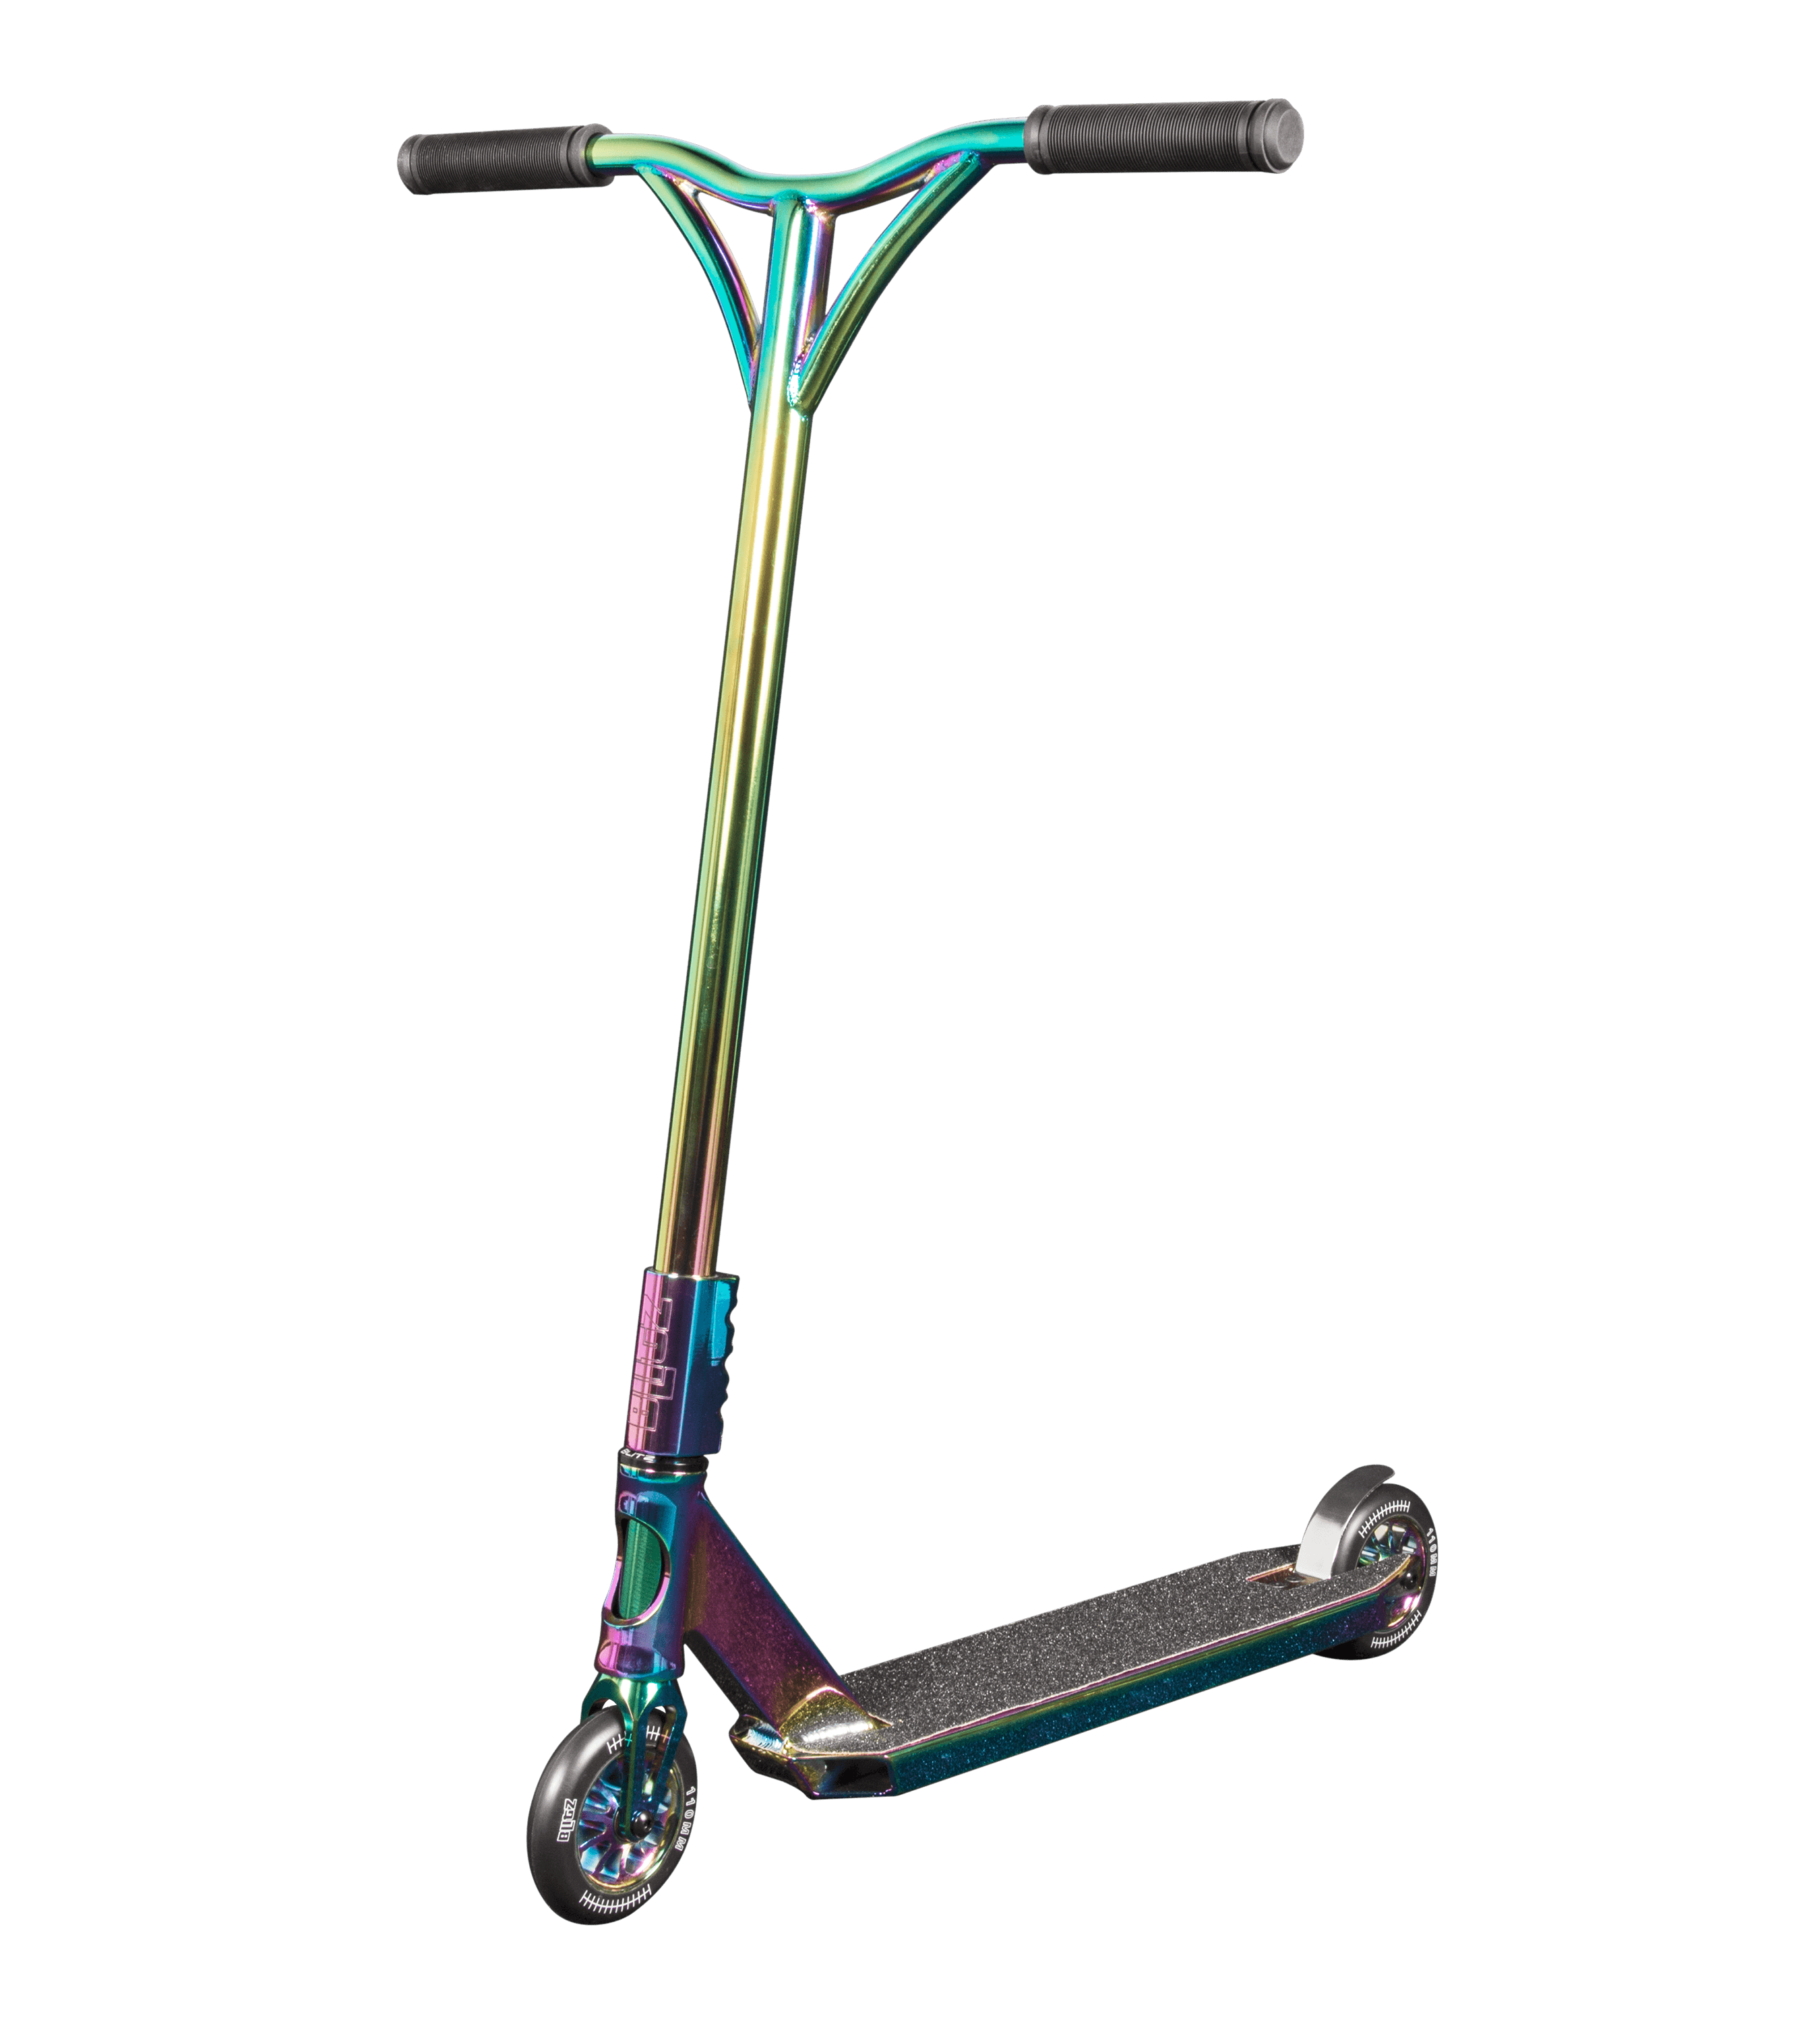 Scooter Drawing